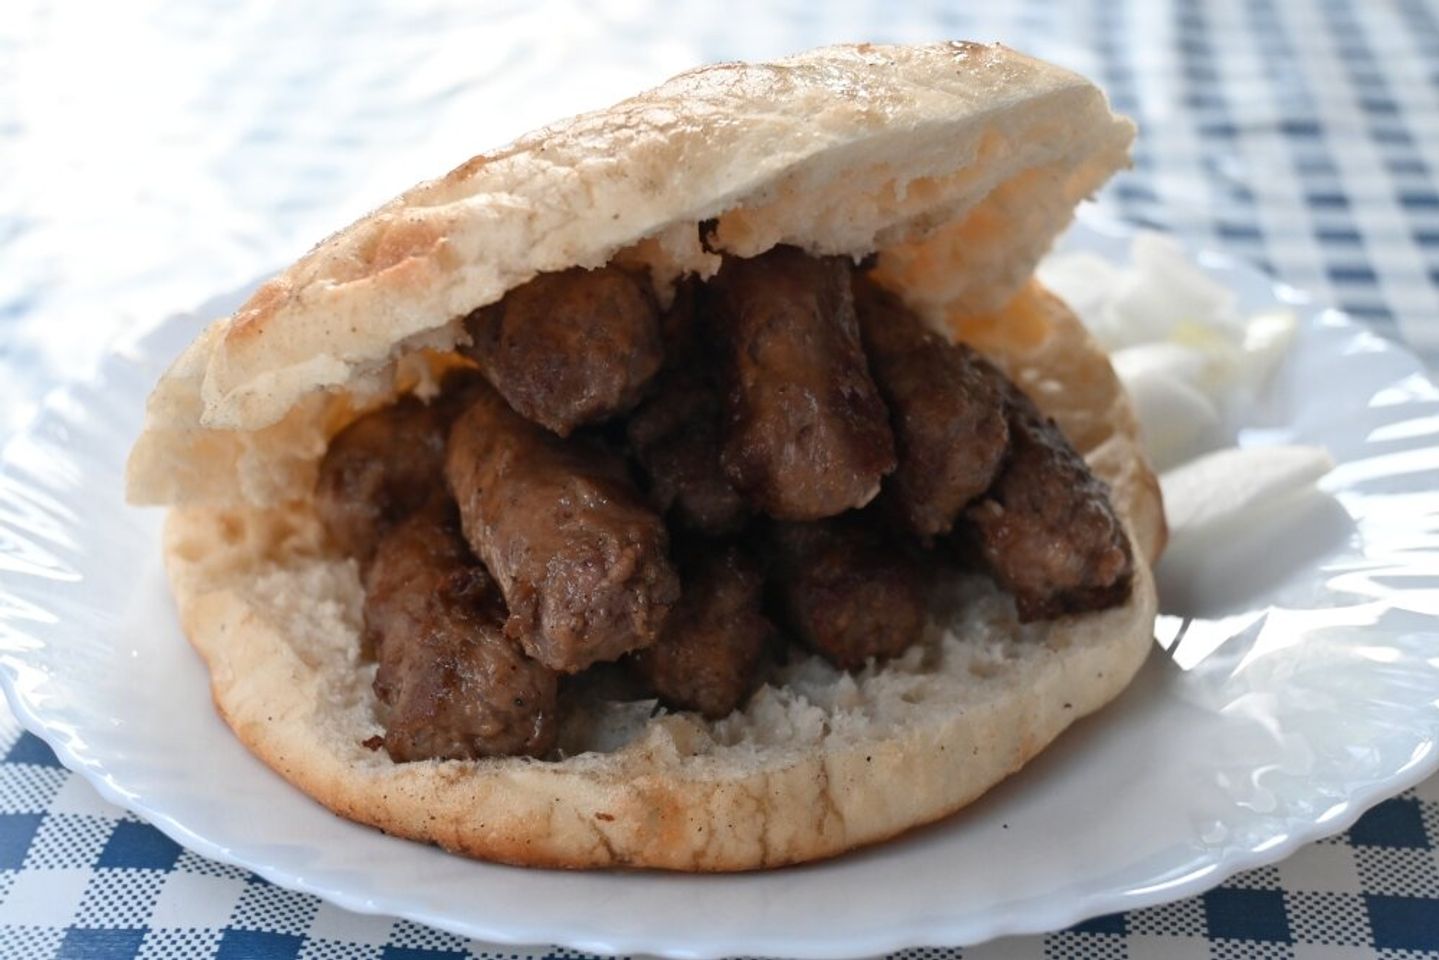 Cevapi is great food to try